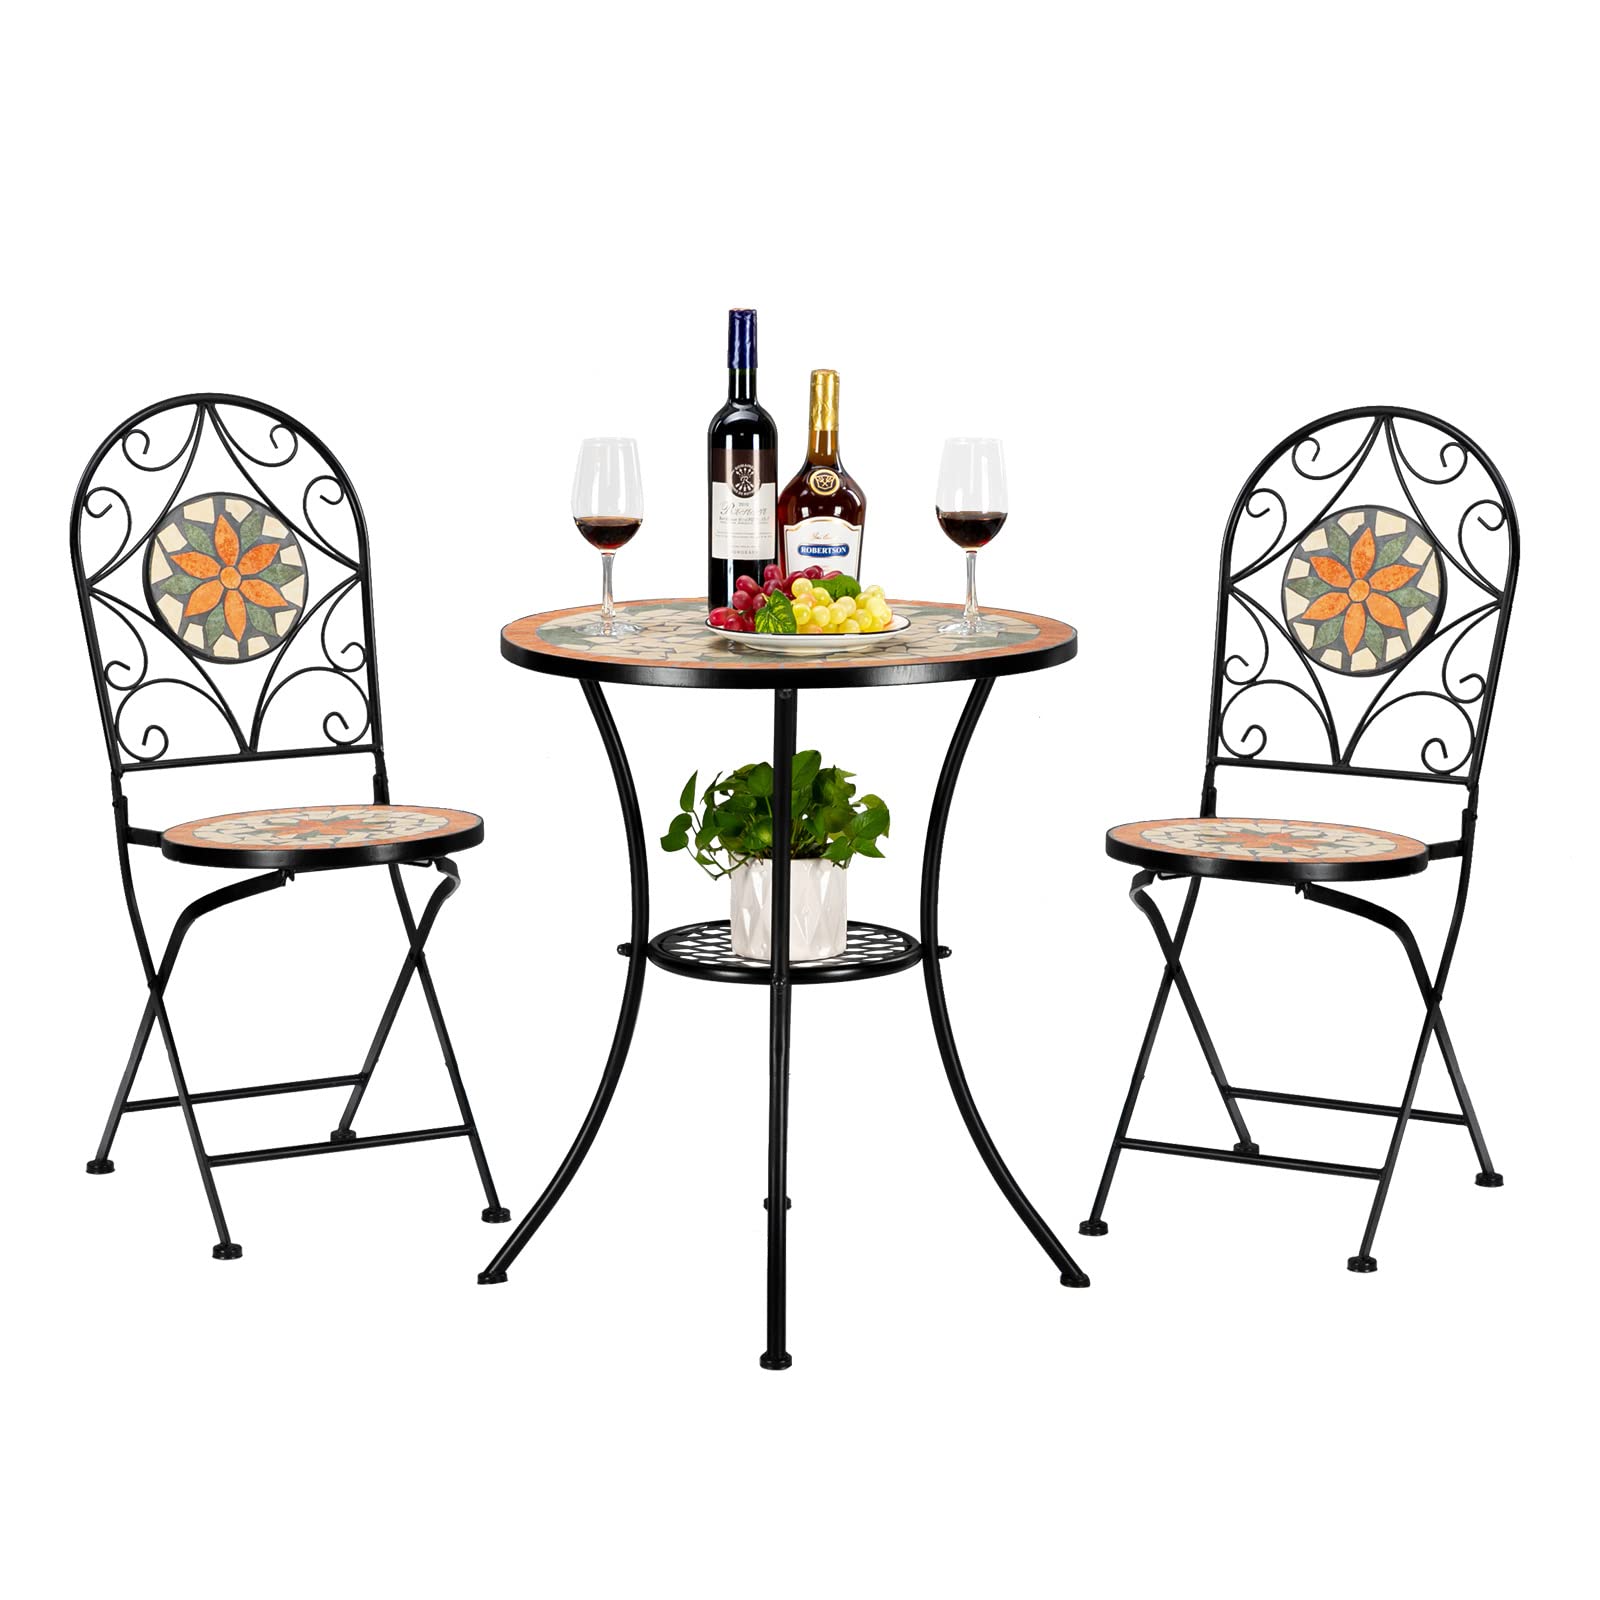 From Cocktail Hour to Dinner Alfresco: Why the Crosley Seymour Outdoor Bistro Table is Your Deck’s Secret Weapon